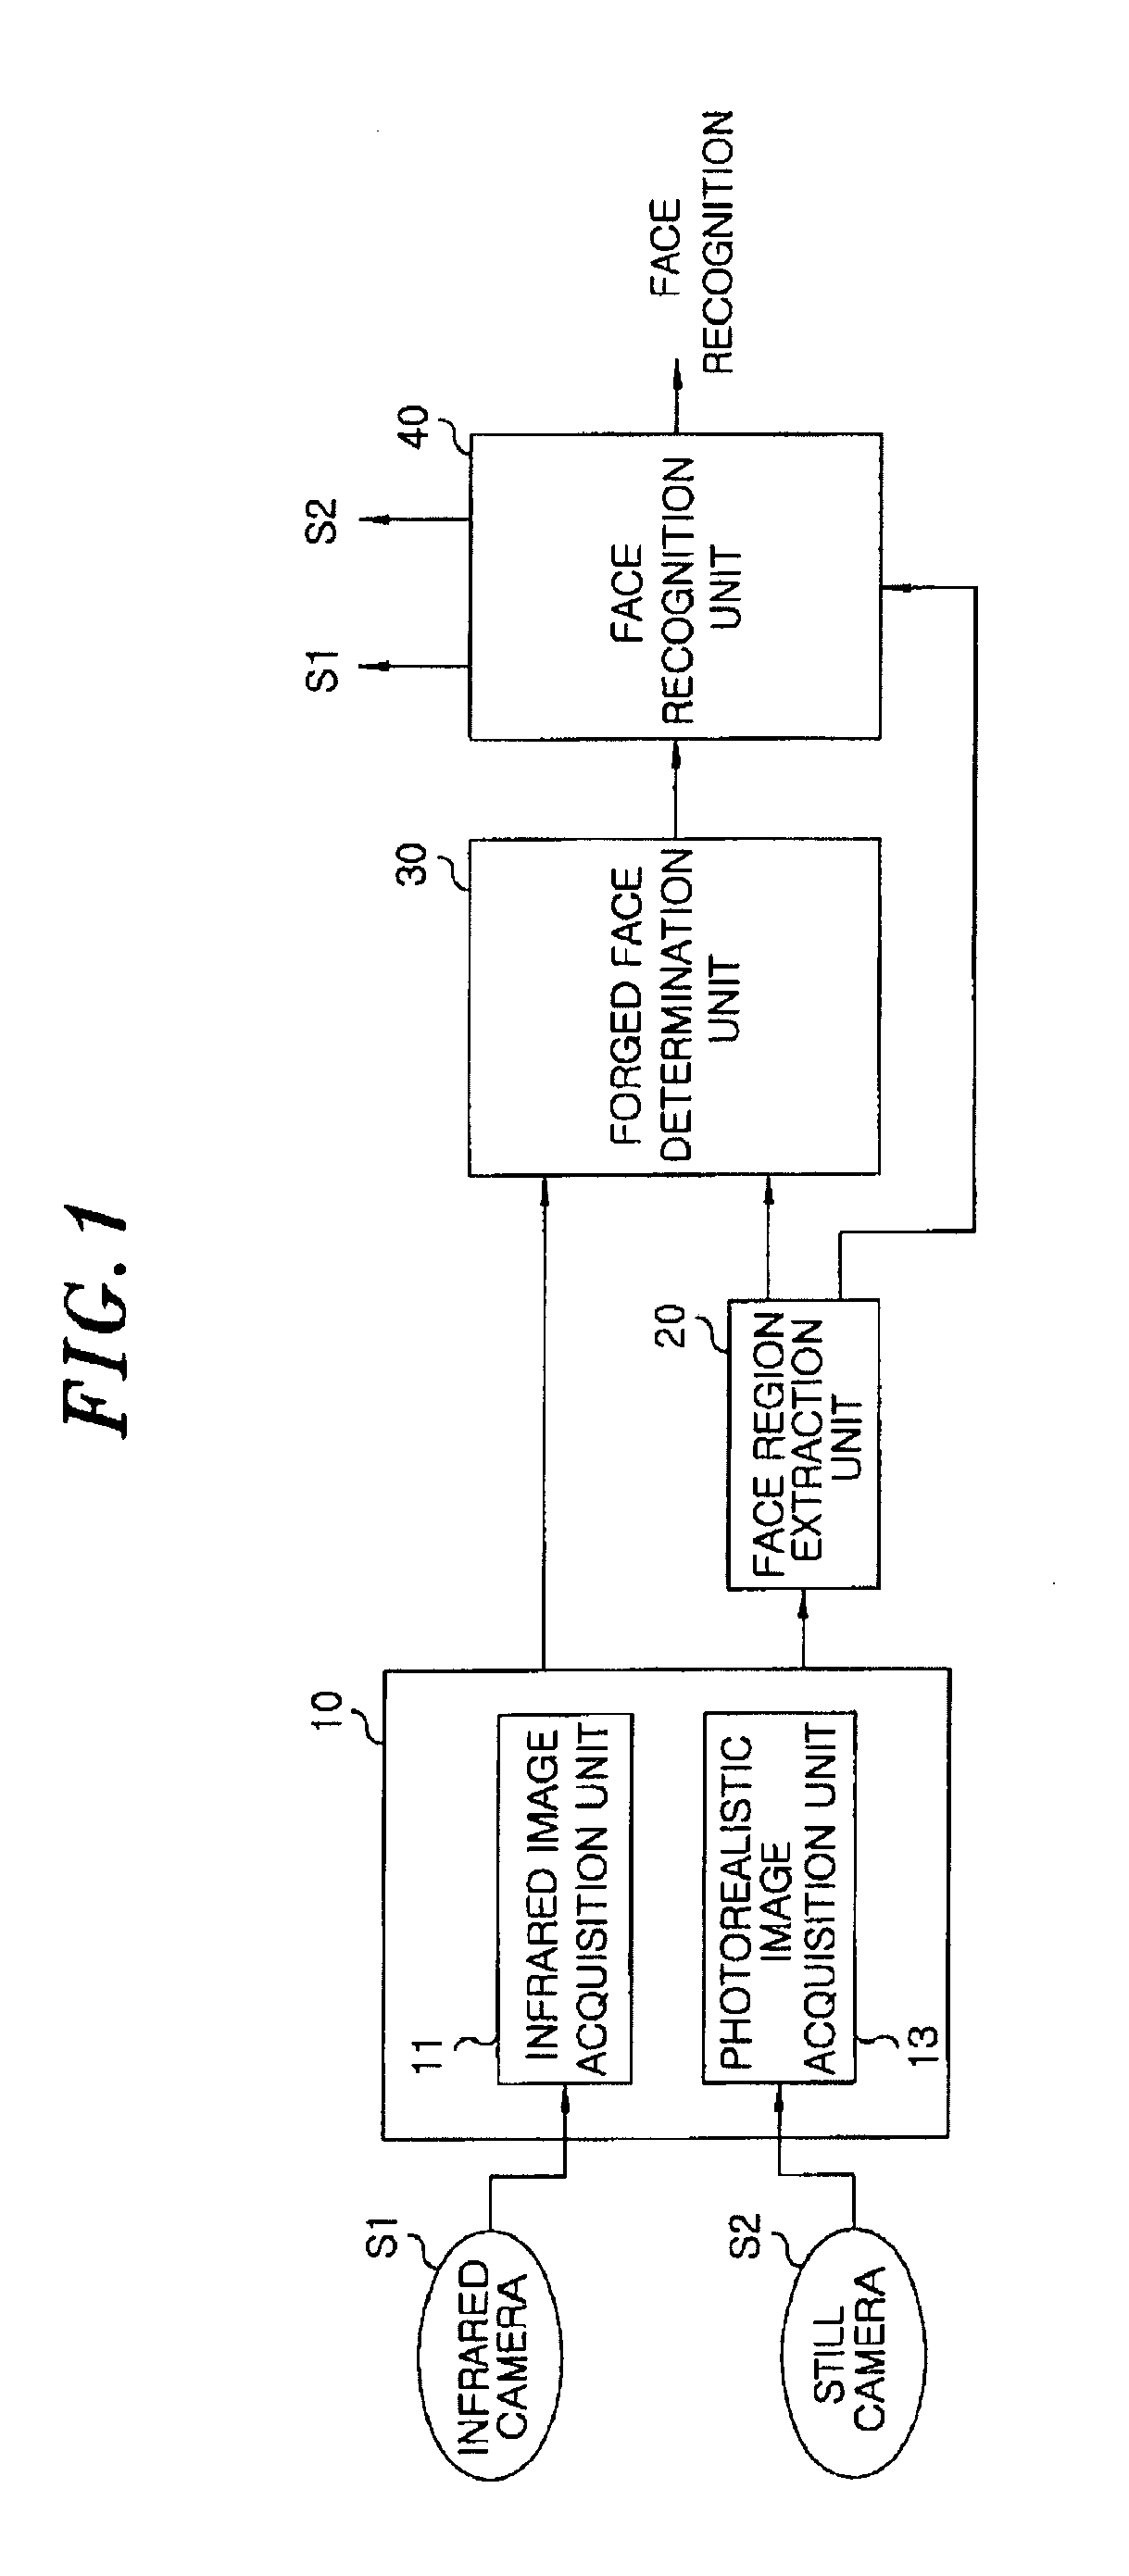 Method and apparatus for detecting forged face using infrared image